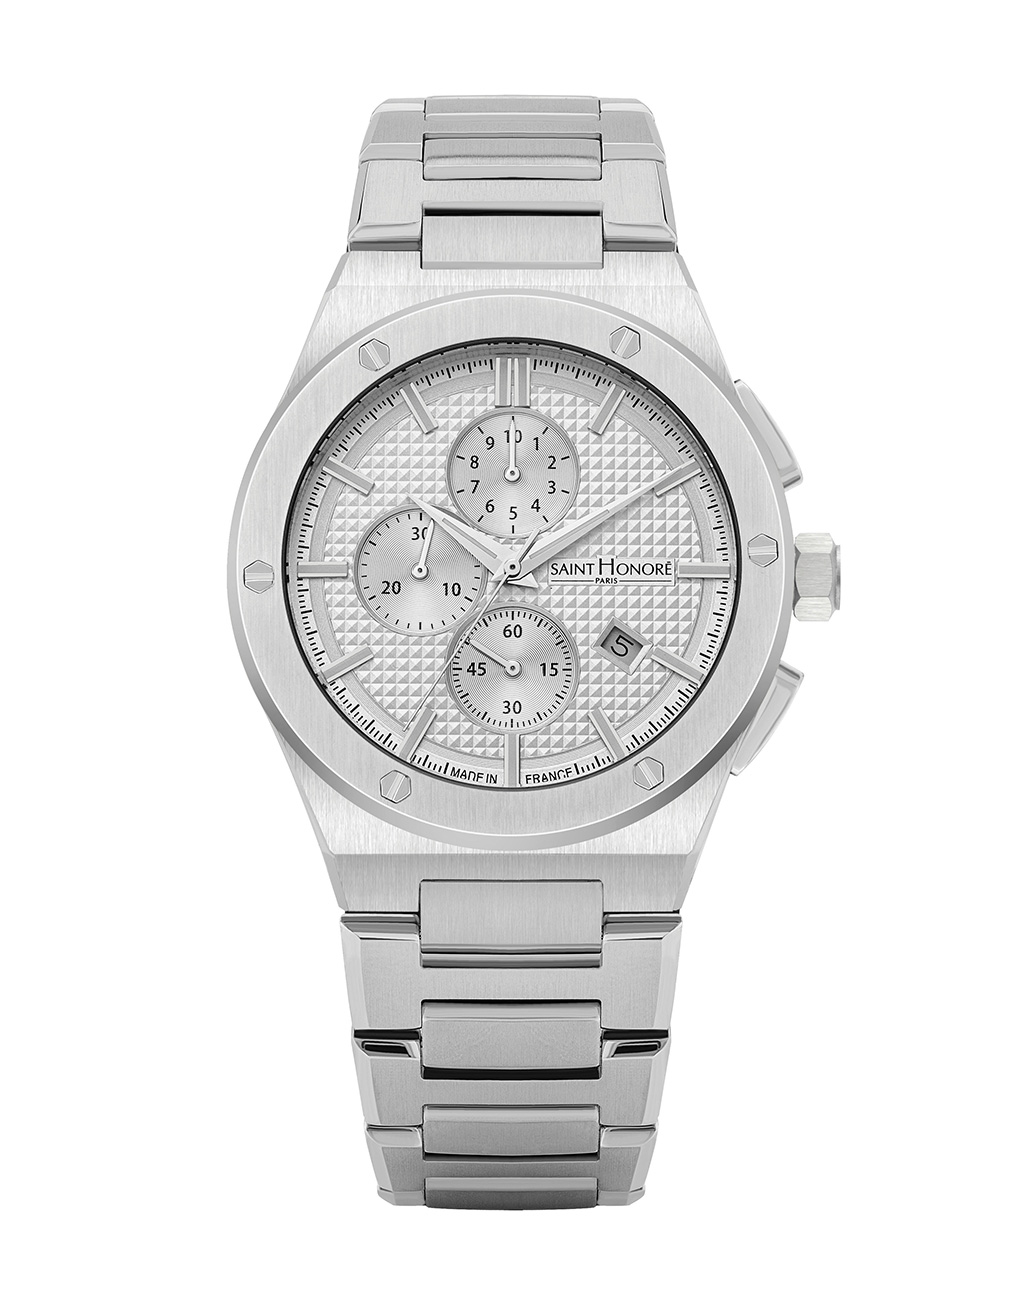 HAUSSMAN II Men's watch - stainless steel, white dial, stainless steel strap